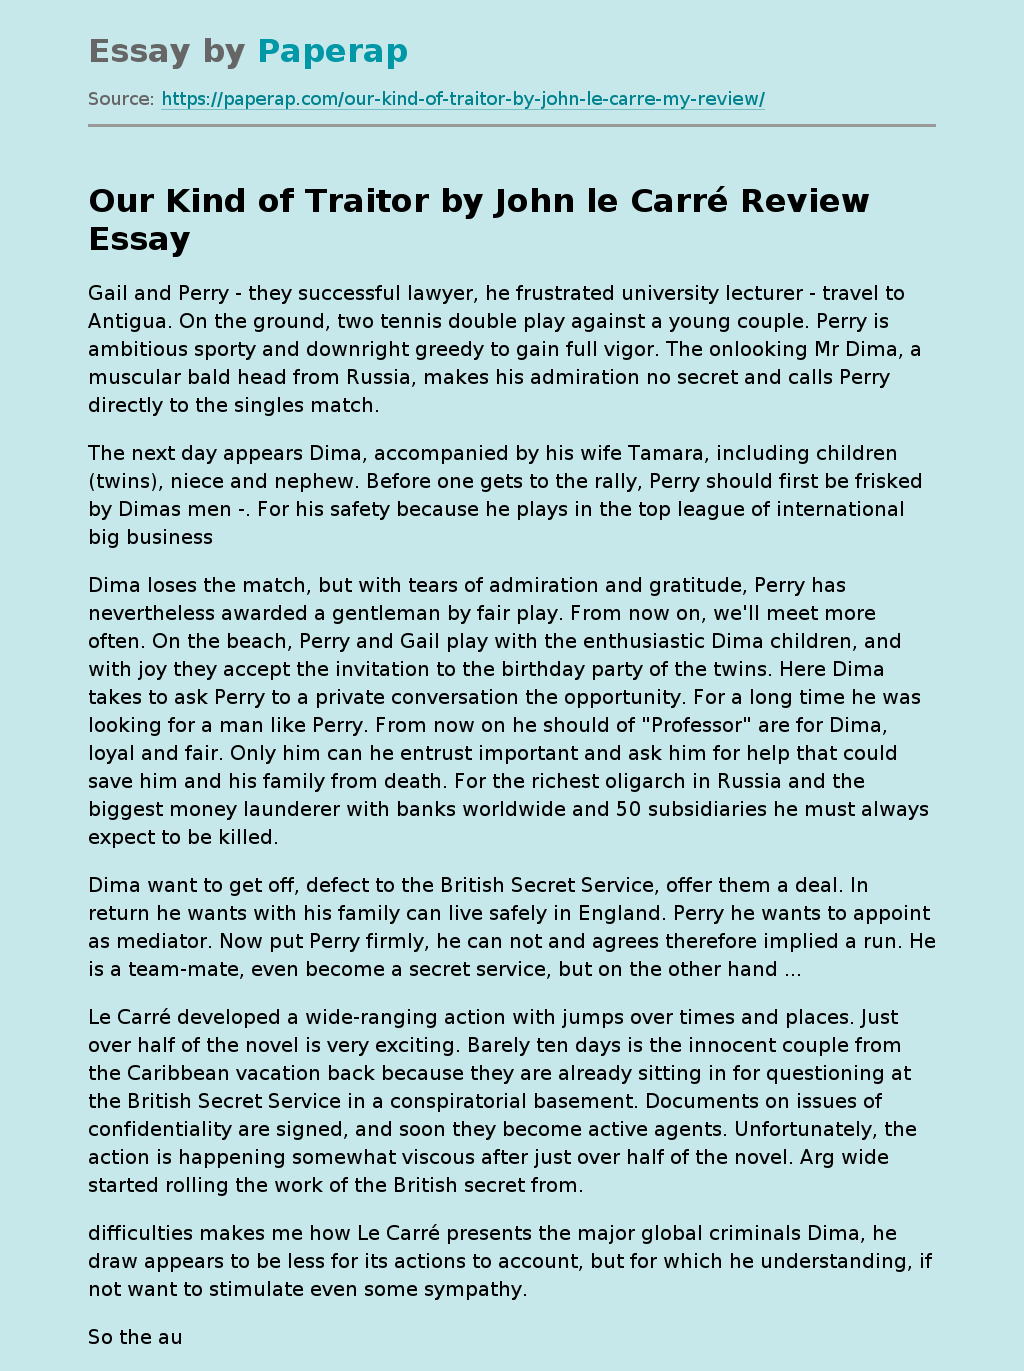 Our Kind of Traitor by John le Carré Review